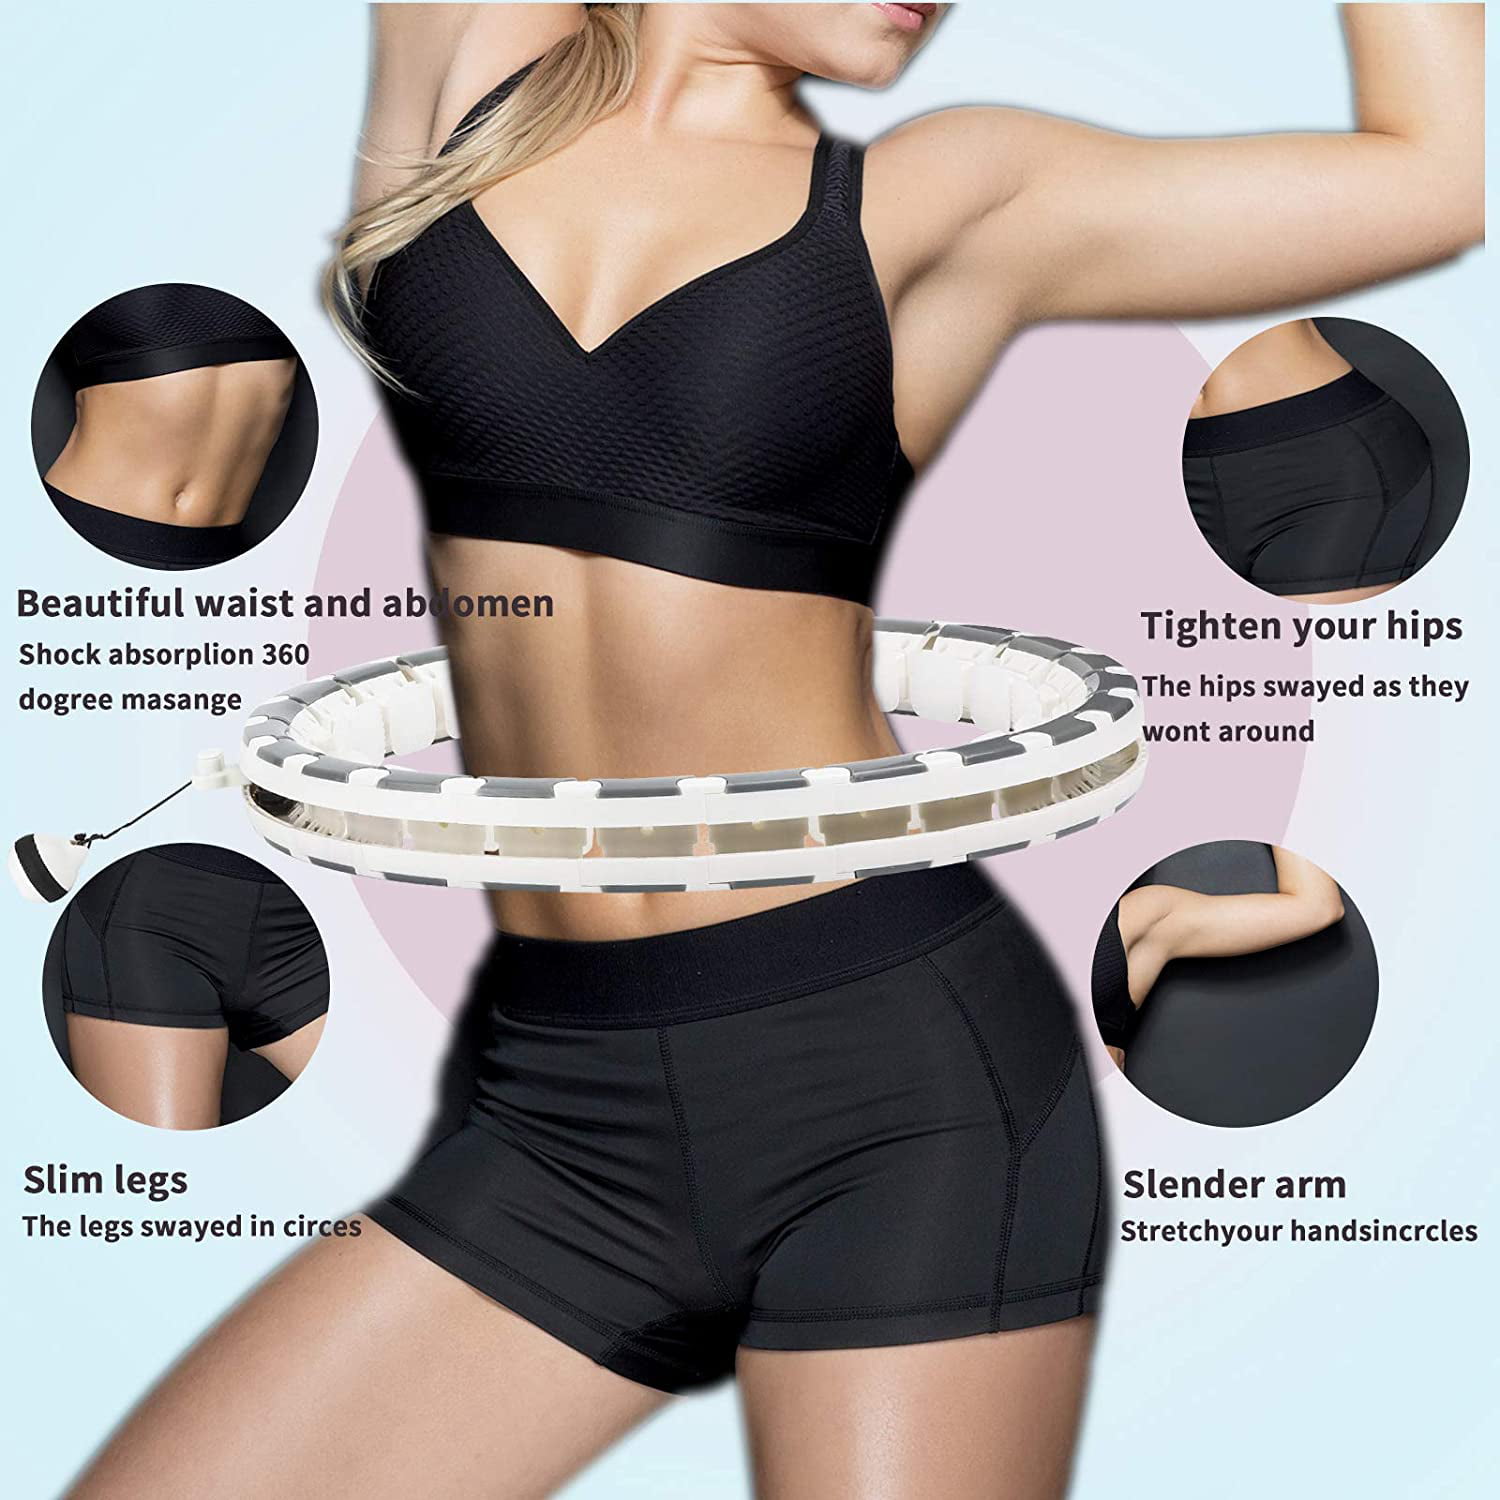 ELUCHANG Smart Exercise Hoop for Adults Kids,24 Knots Detachable Adjustable Auto-Spinning Hoops Thin Waist Abdominal Gym Fitness Equipment Home Training 